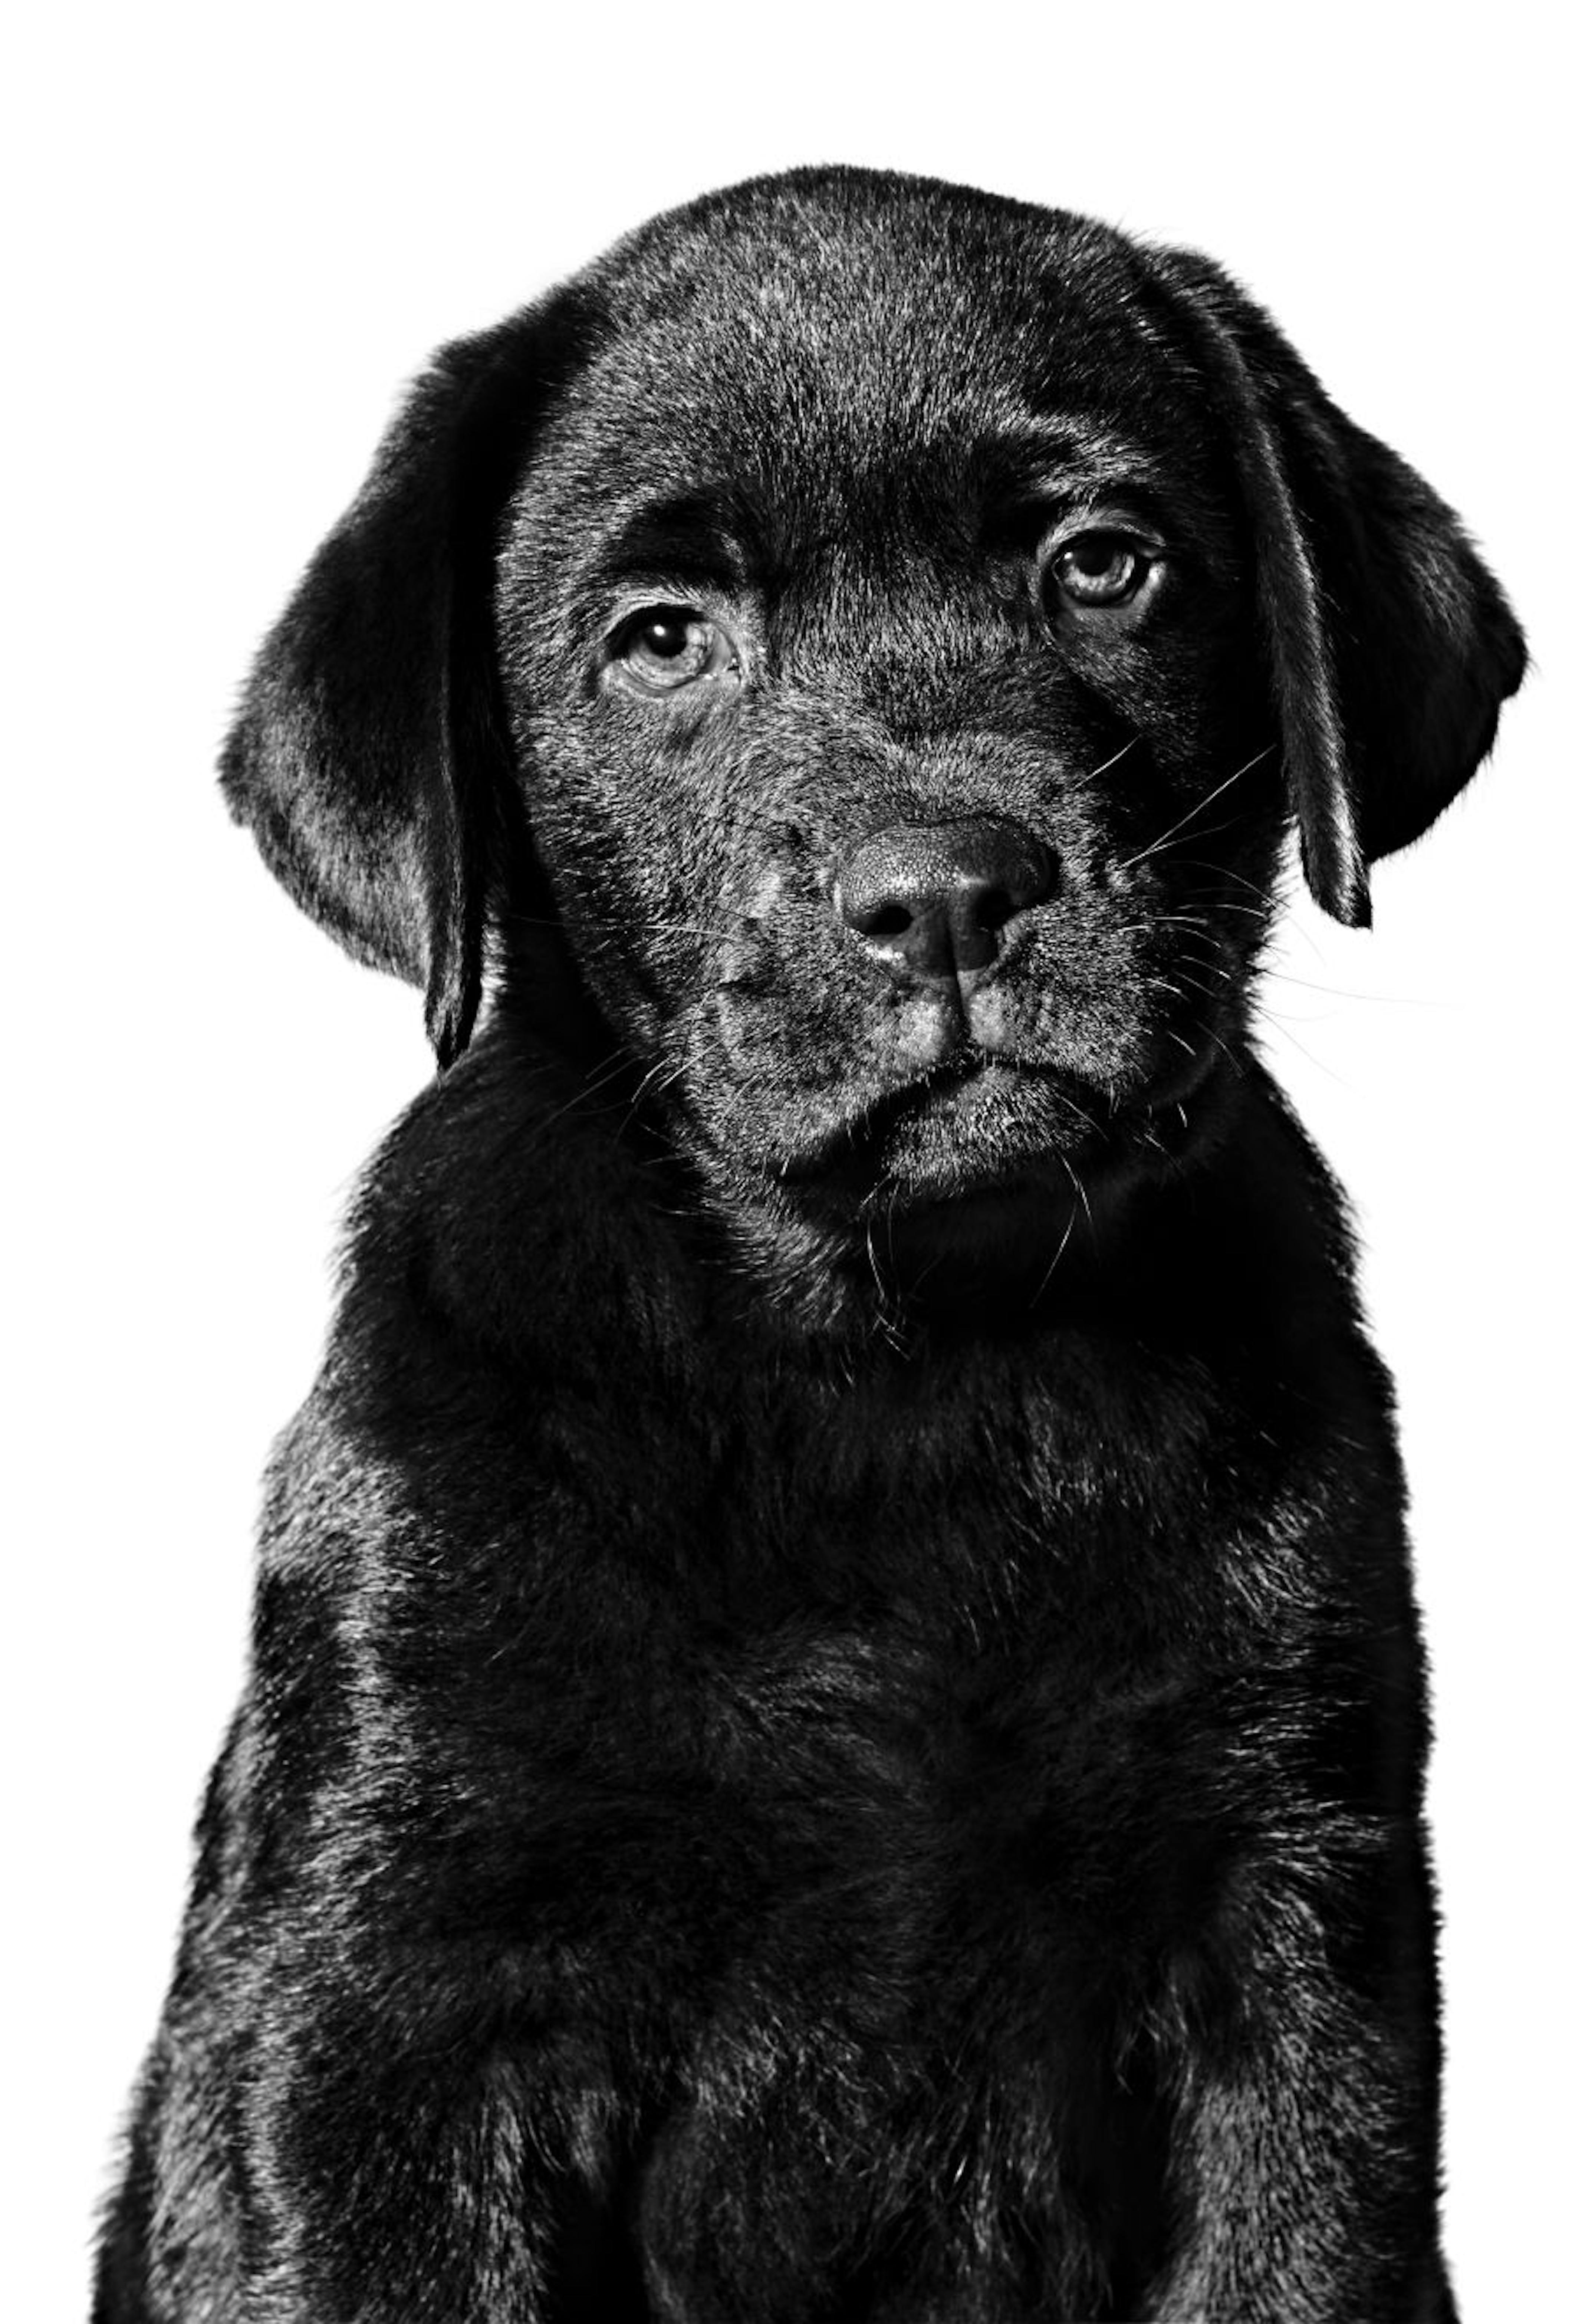 Chocolate Labrador Retriever puppy in black and white on a white background